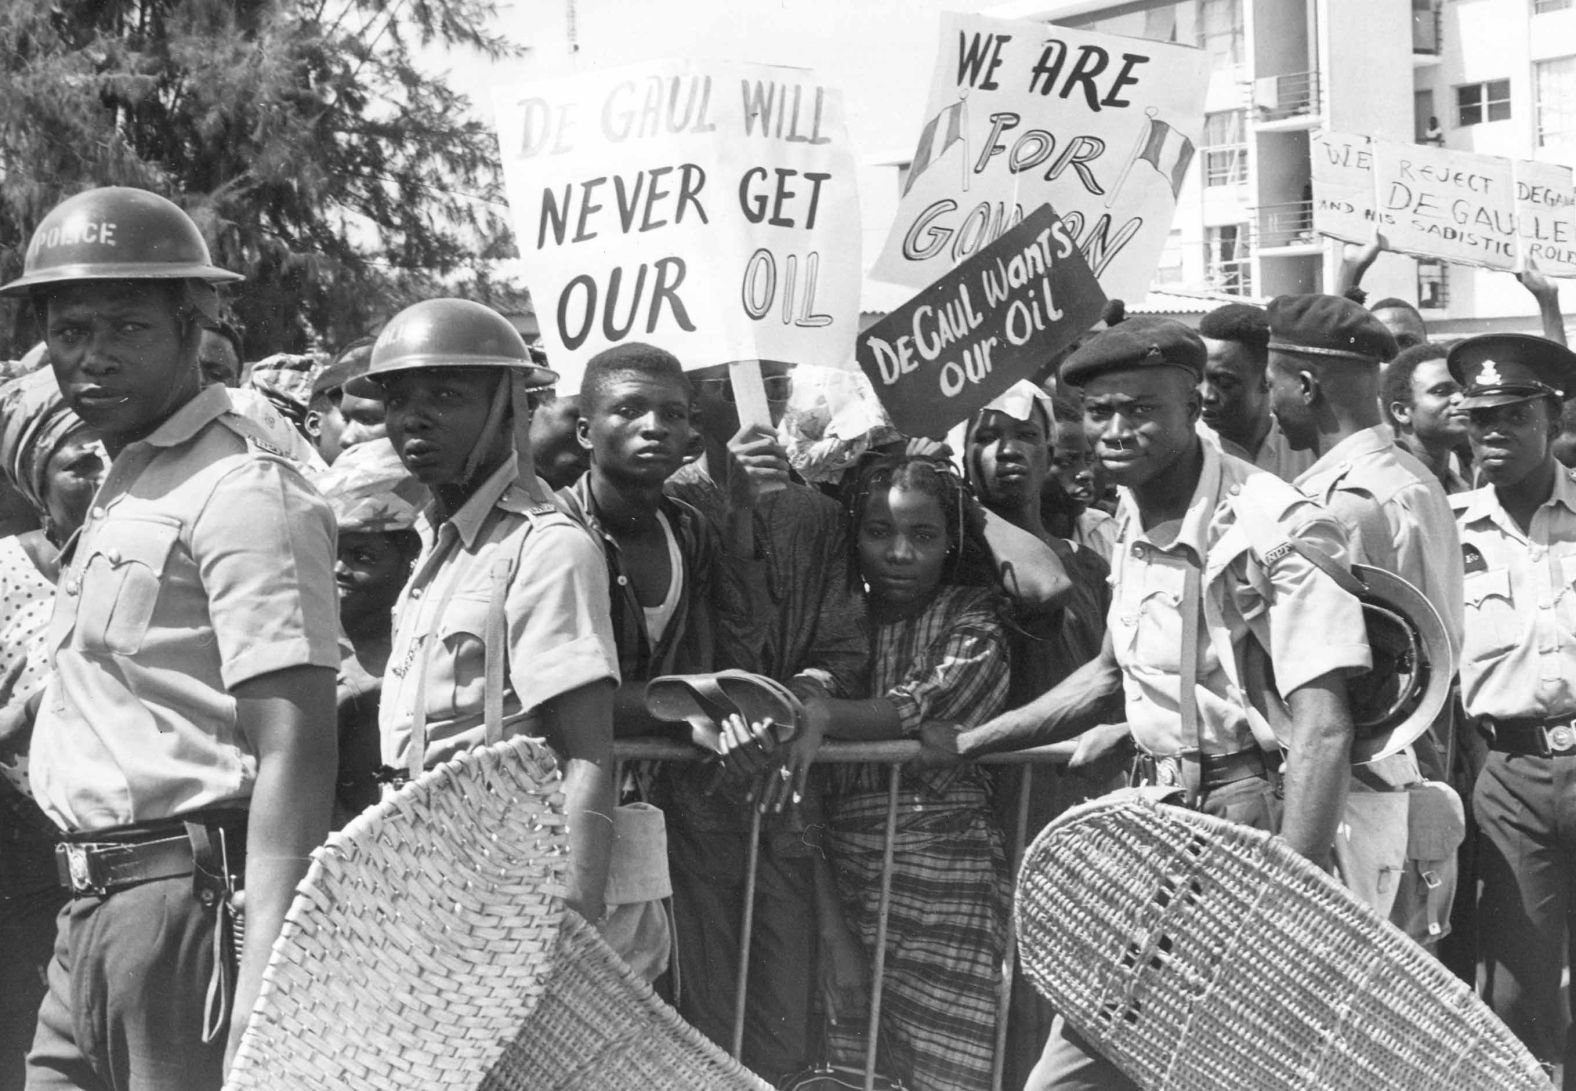 Nigerian police push back crowds of demonstrators outside the French Embassy in Lagos on September 16, 1968. An estimated 2,000 demonstrators presented the French ambassador with a letter protesting French assistance to Biafra. France provided weapons and mercenary fighters to Biafra and promoted their cause internationally, describing the situation as a genocide. <br />